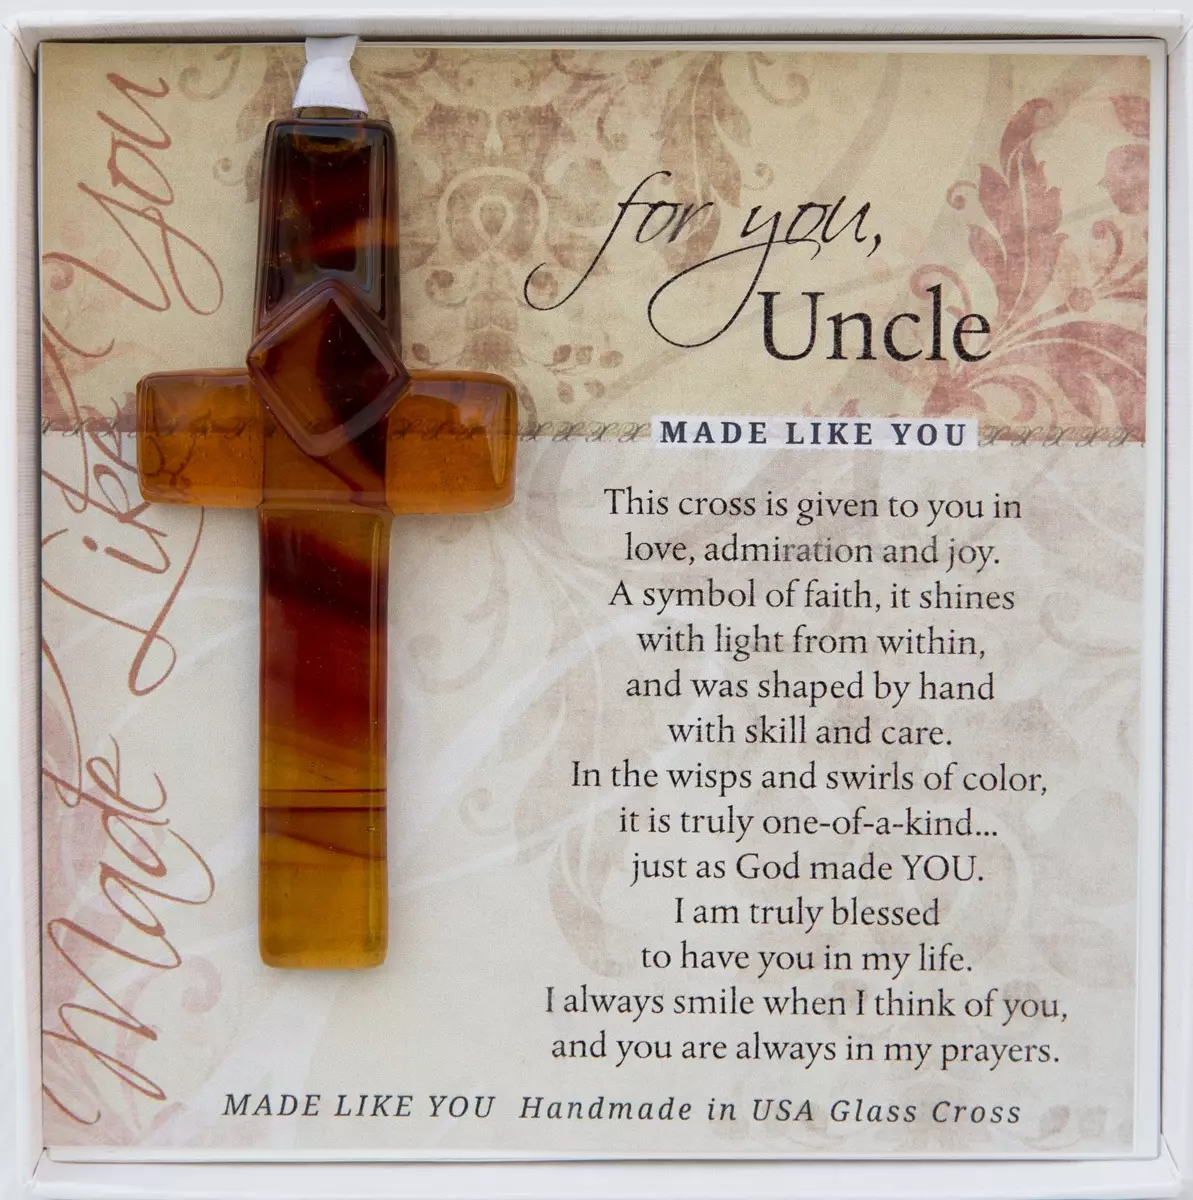 The Grandparent Gift Co. Beautiful Handmade Cross With Sentiment